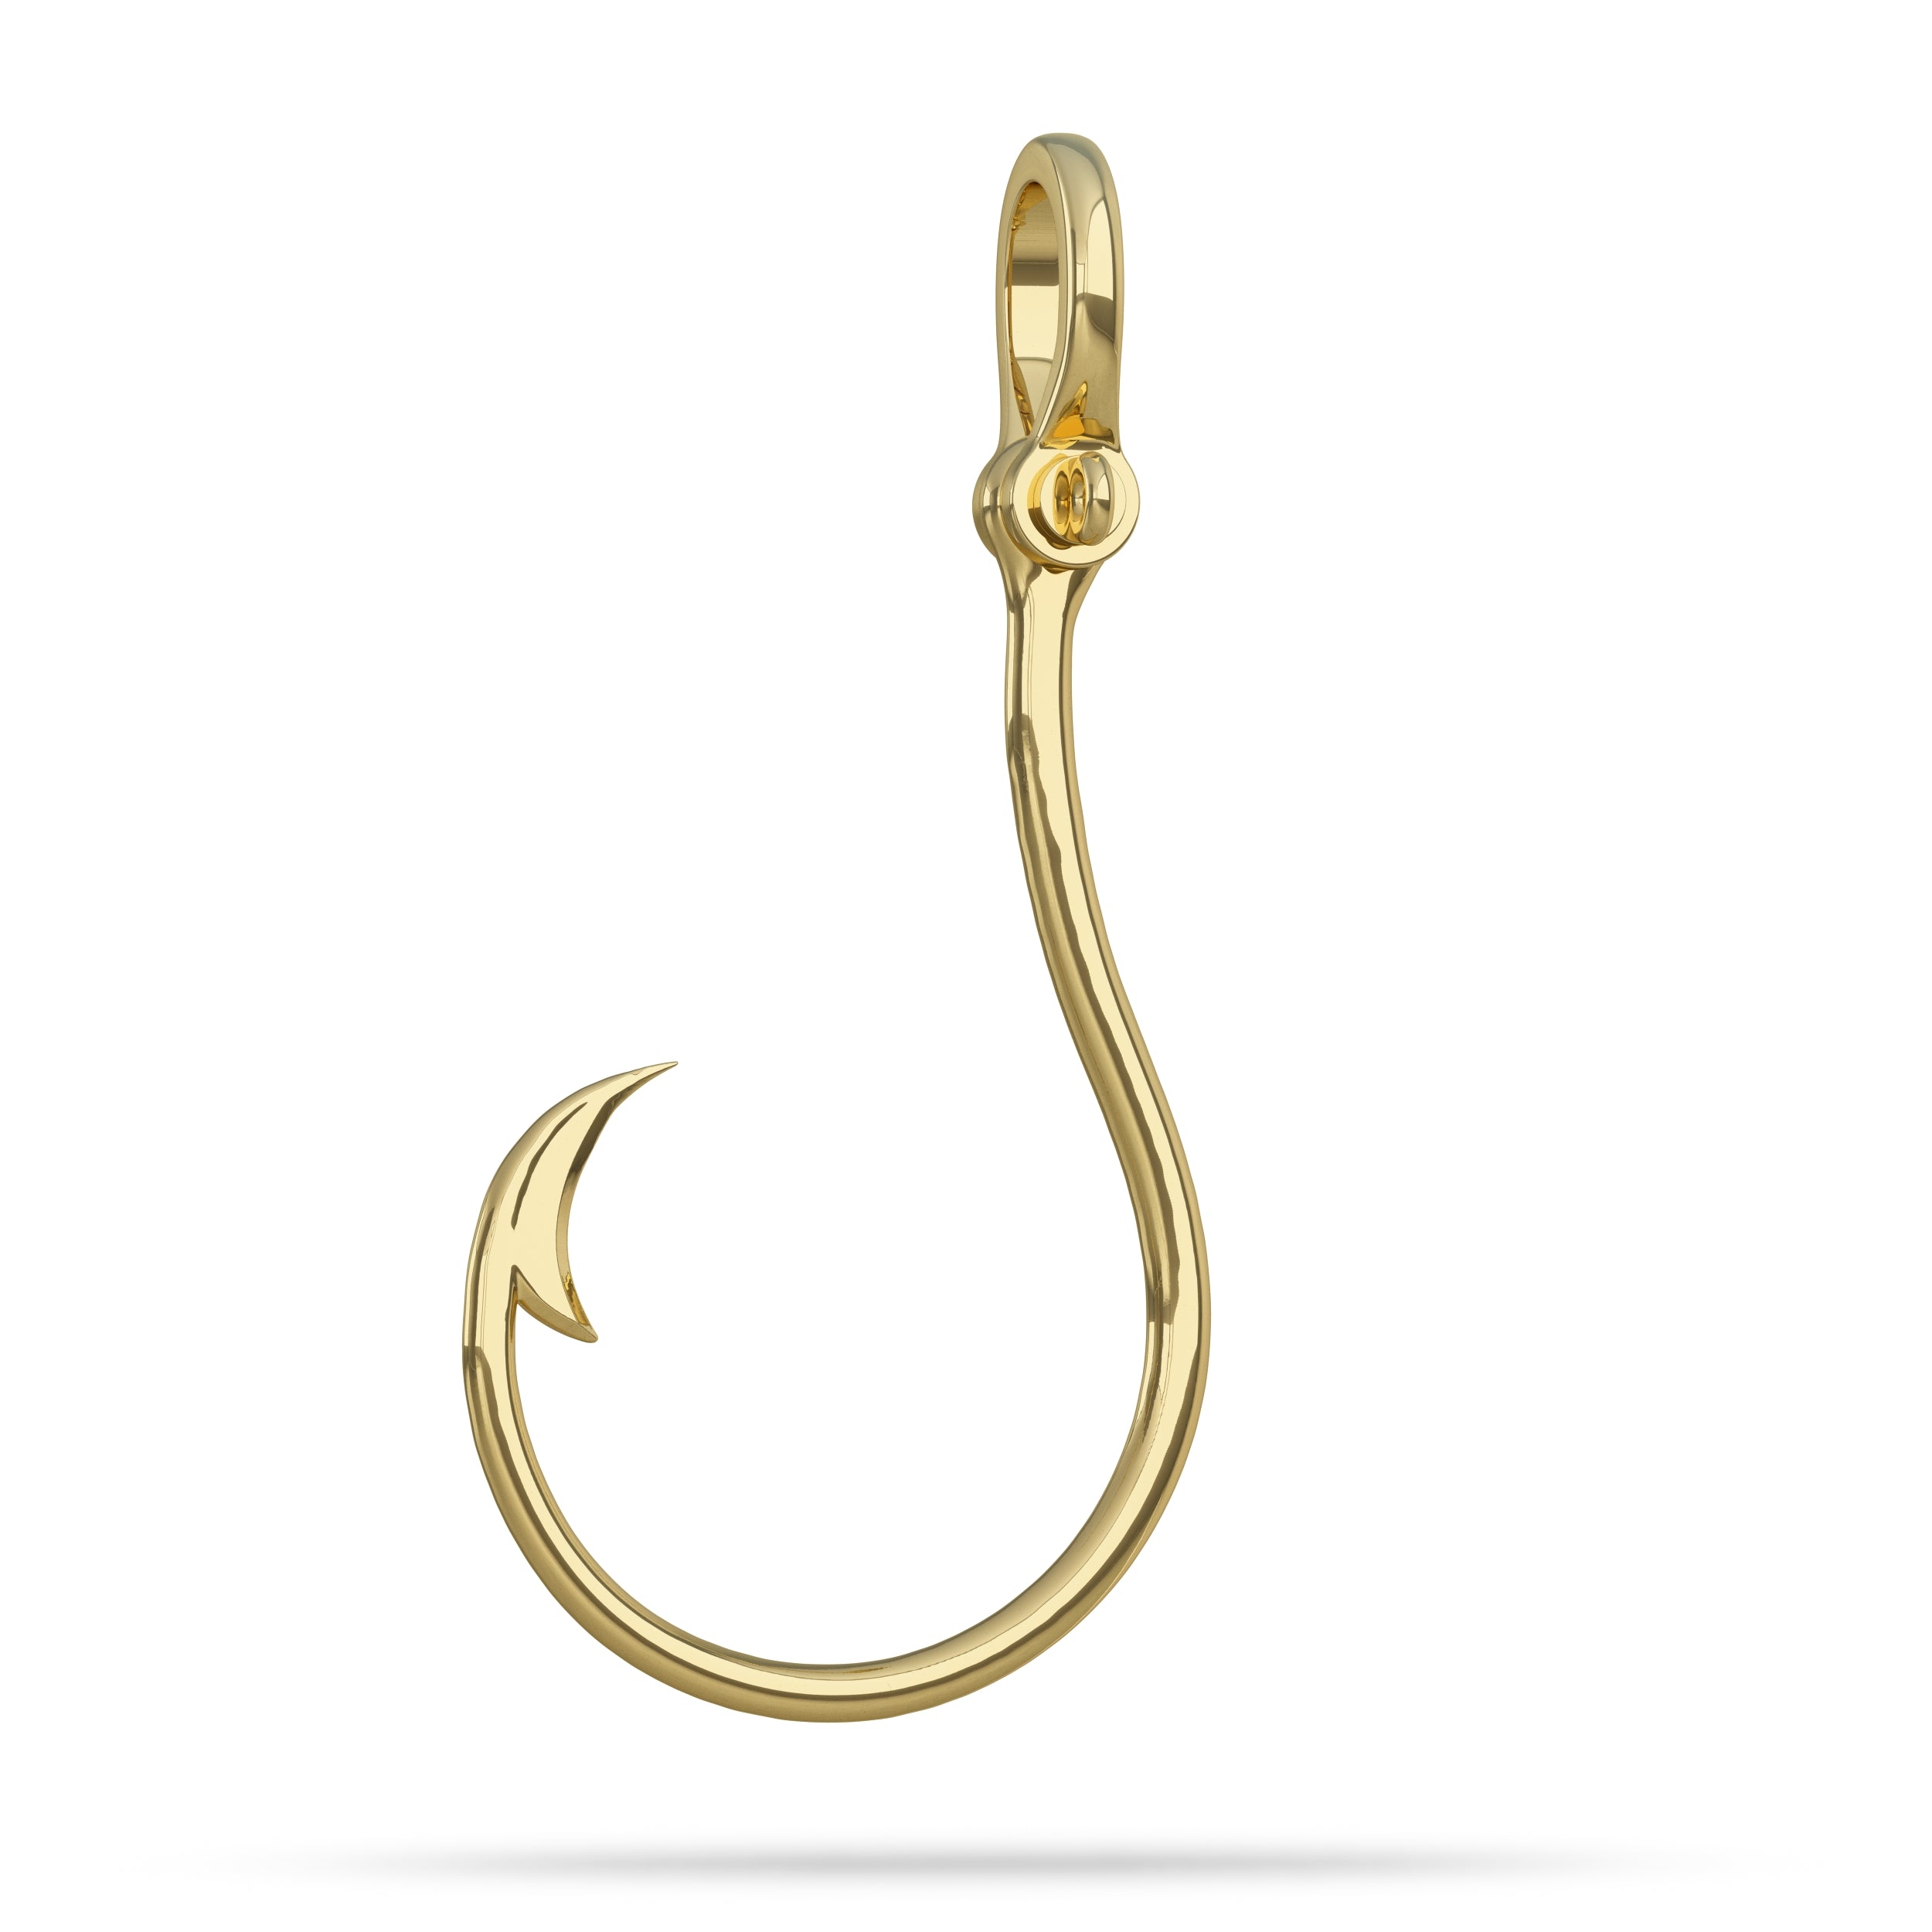 Circle Fish Hook with Shackle - Gold 10k / Large (48mm)